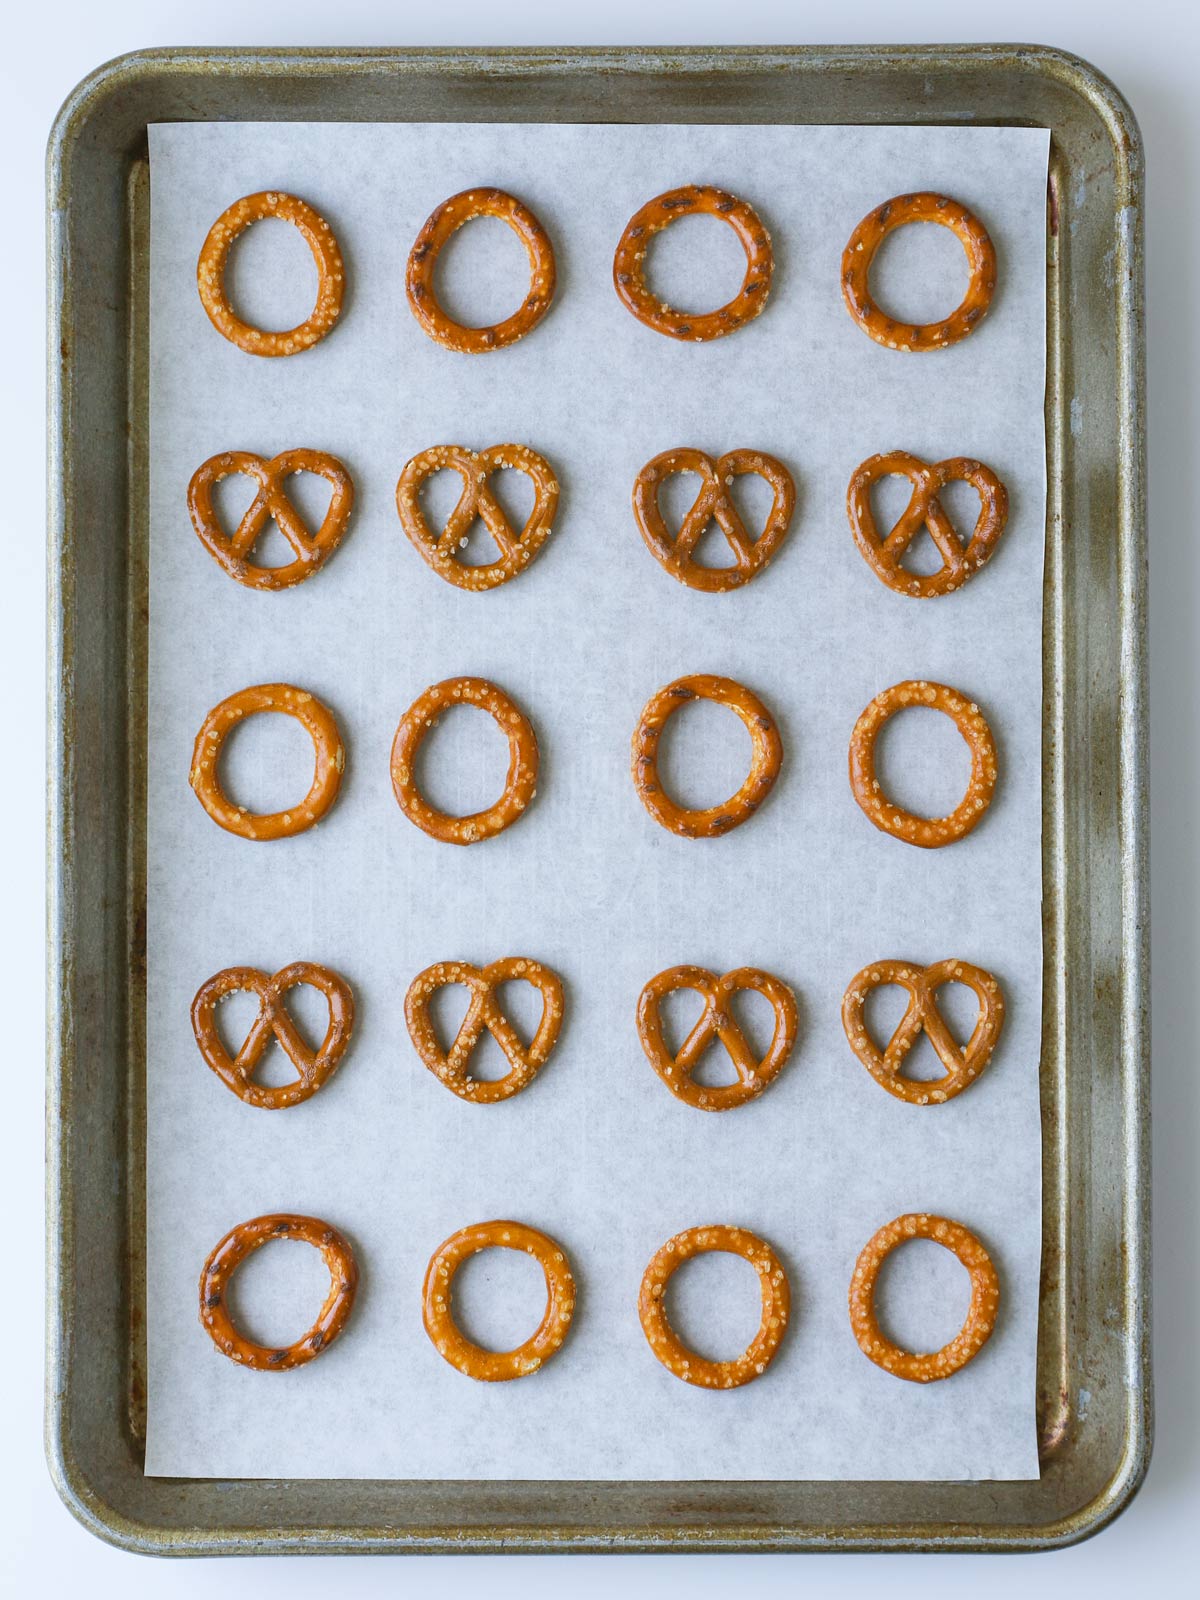 pretzels laid out on a lined baking sheet.